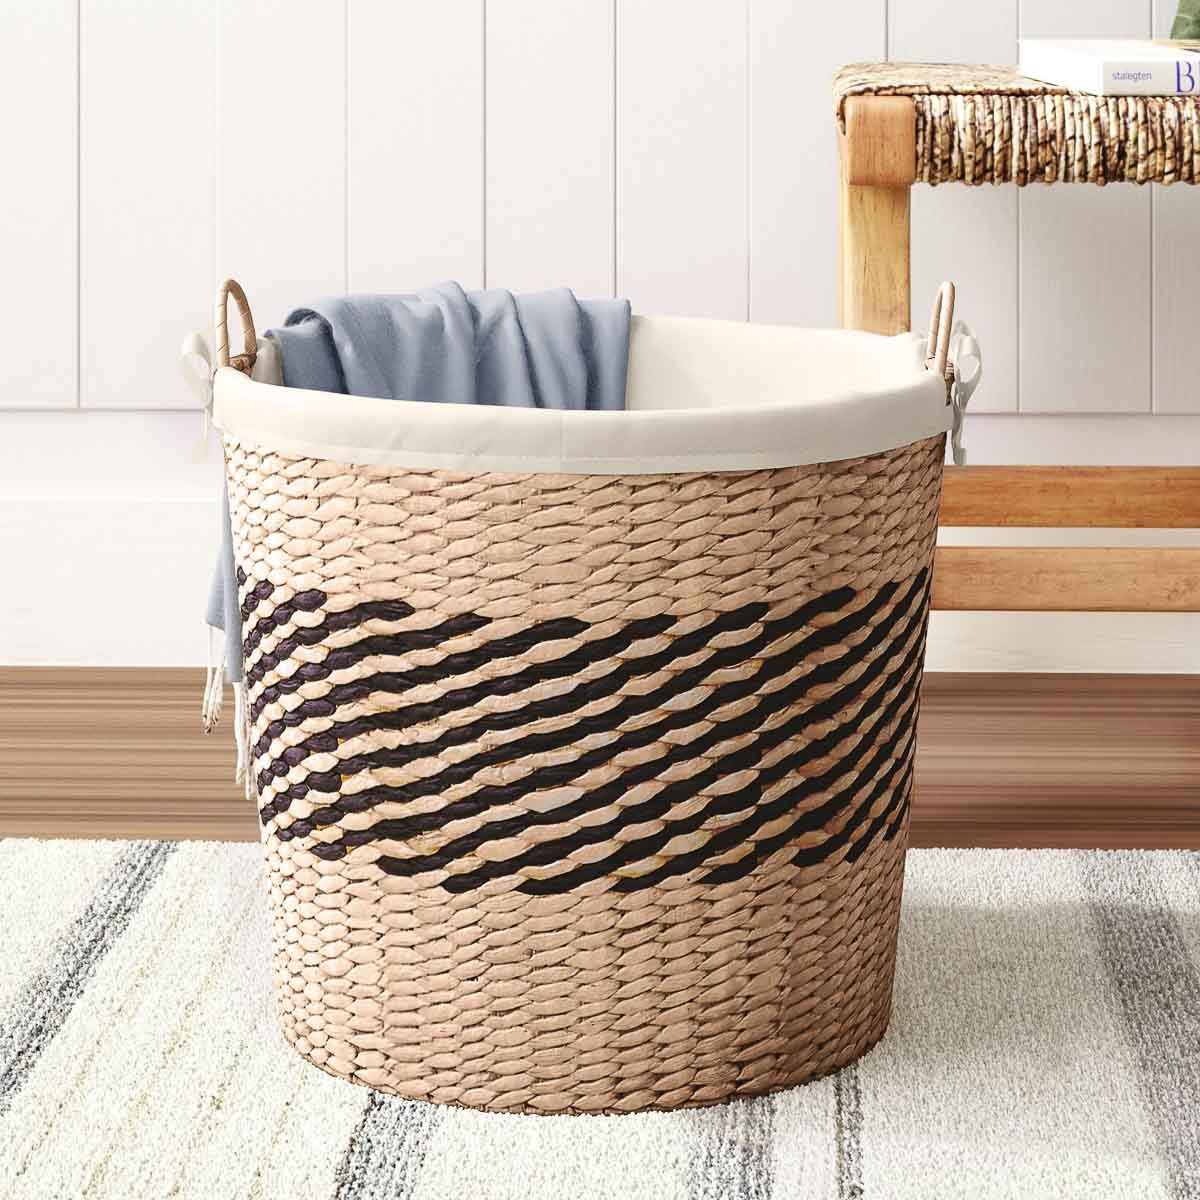 Woven basket with black band